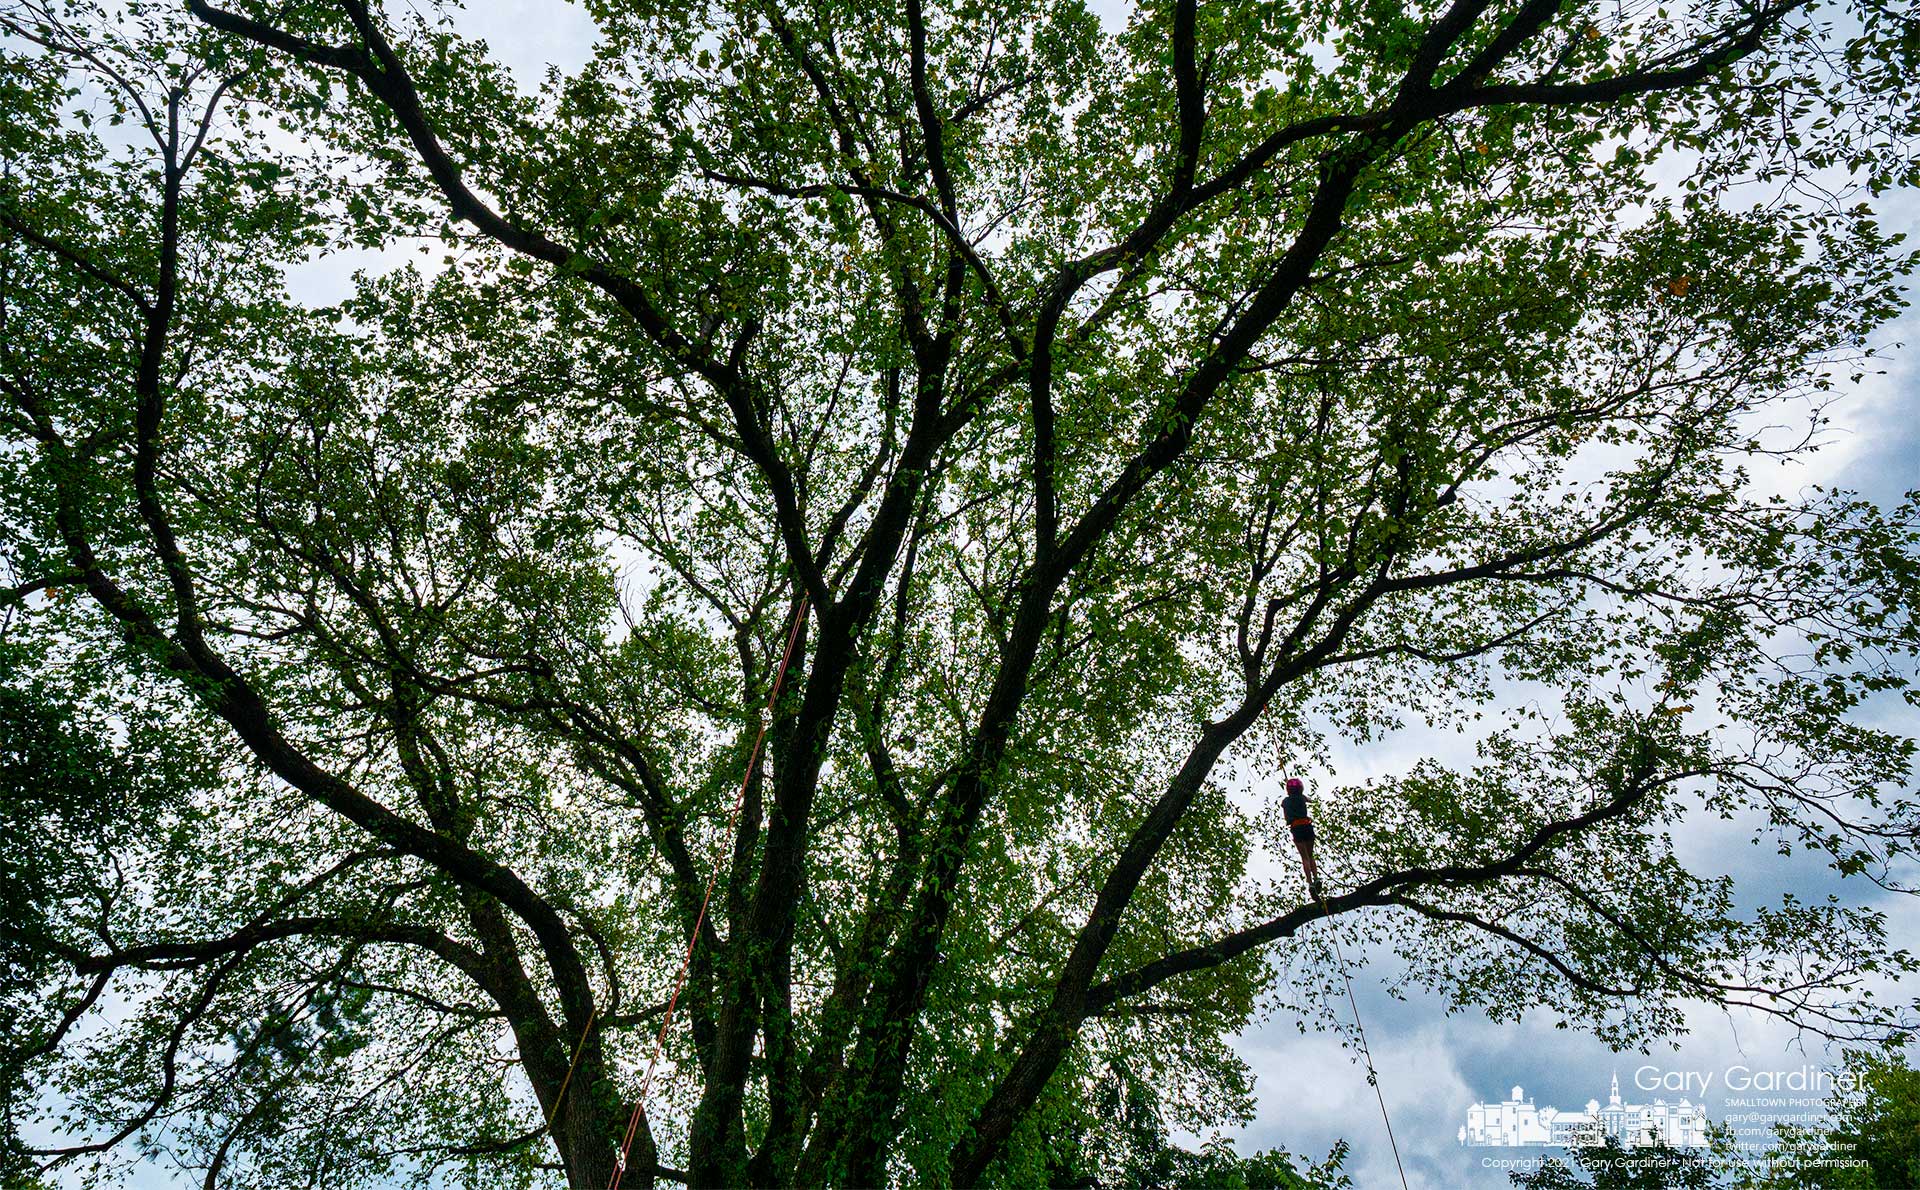 A young girl pulls herself 40-feet into the canopy of a tree at the corner of Alum Creek Par5k during Arbor Fest, an annual city event to raise awareness of the benefits of forest and prairie maintenance. My Final Photo for Sept. 25, 2021.